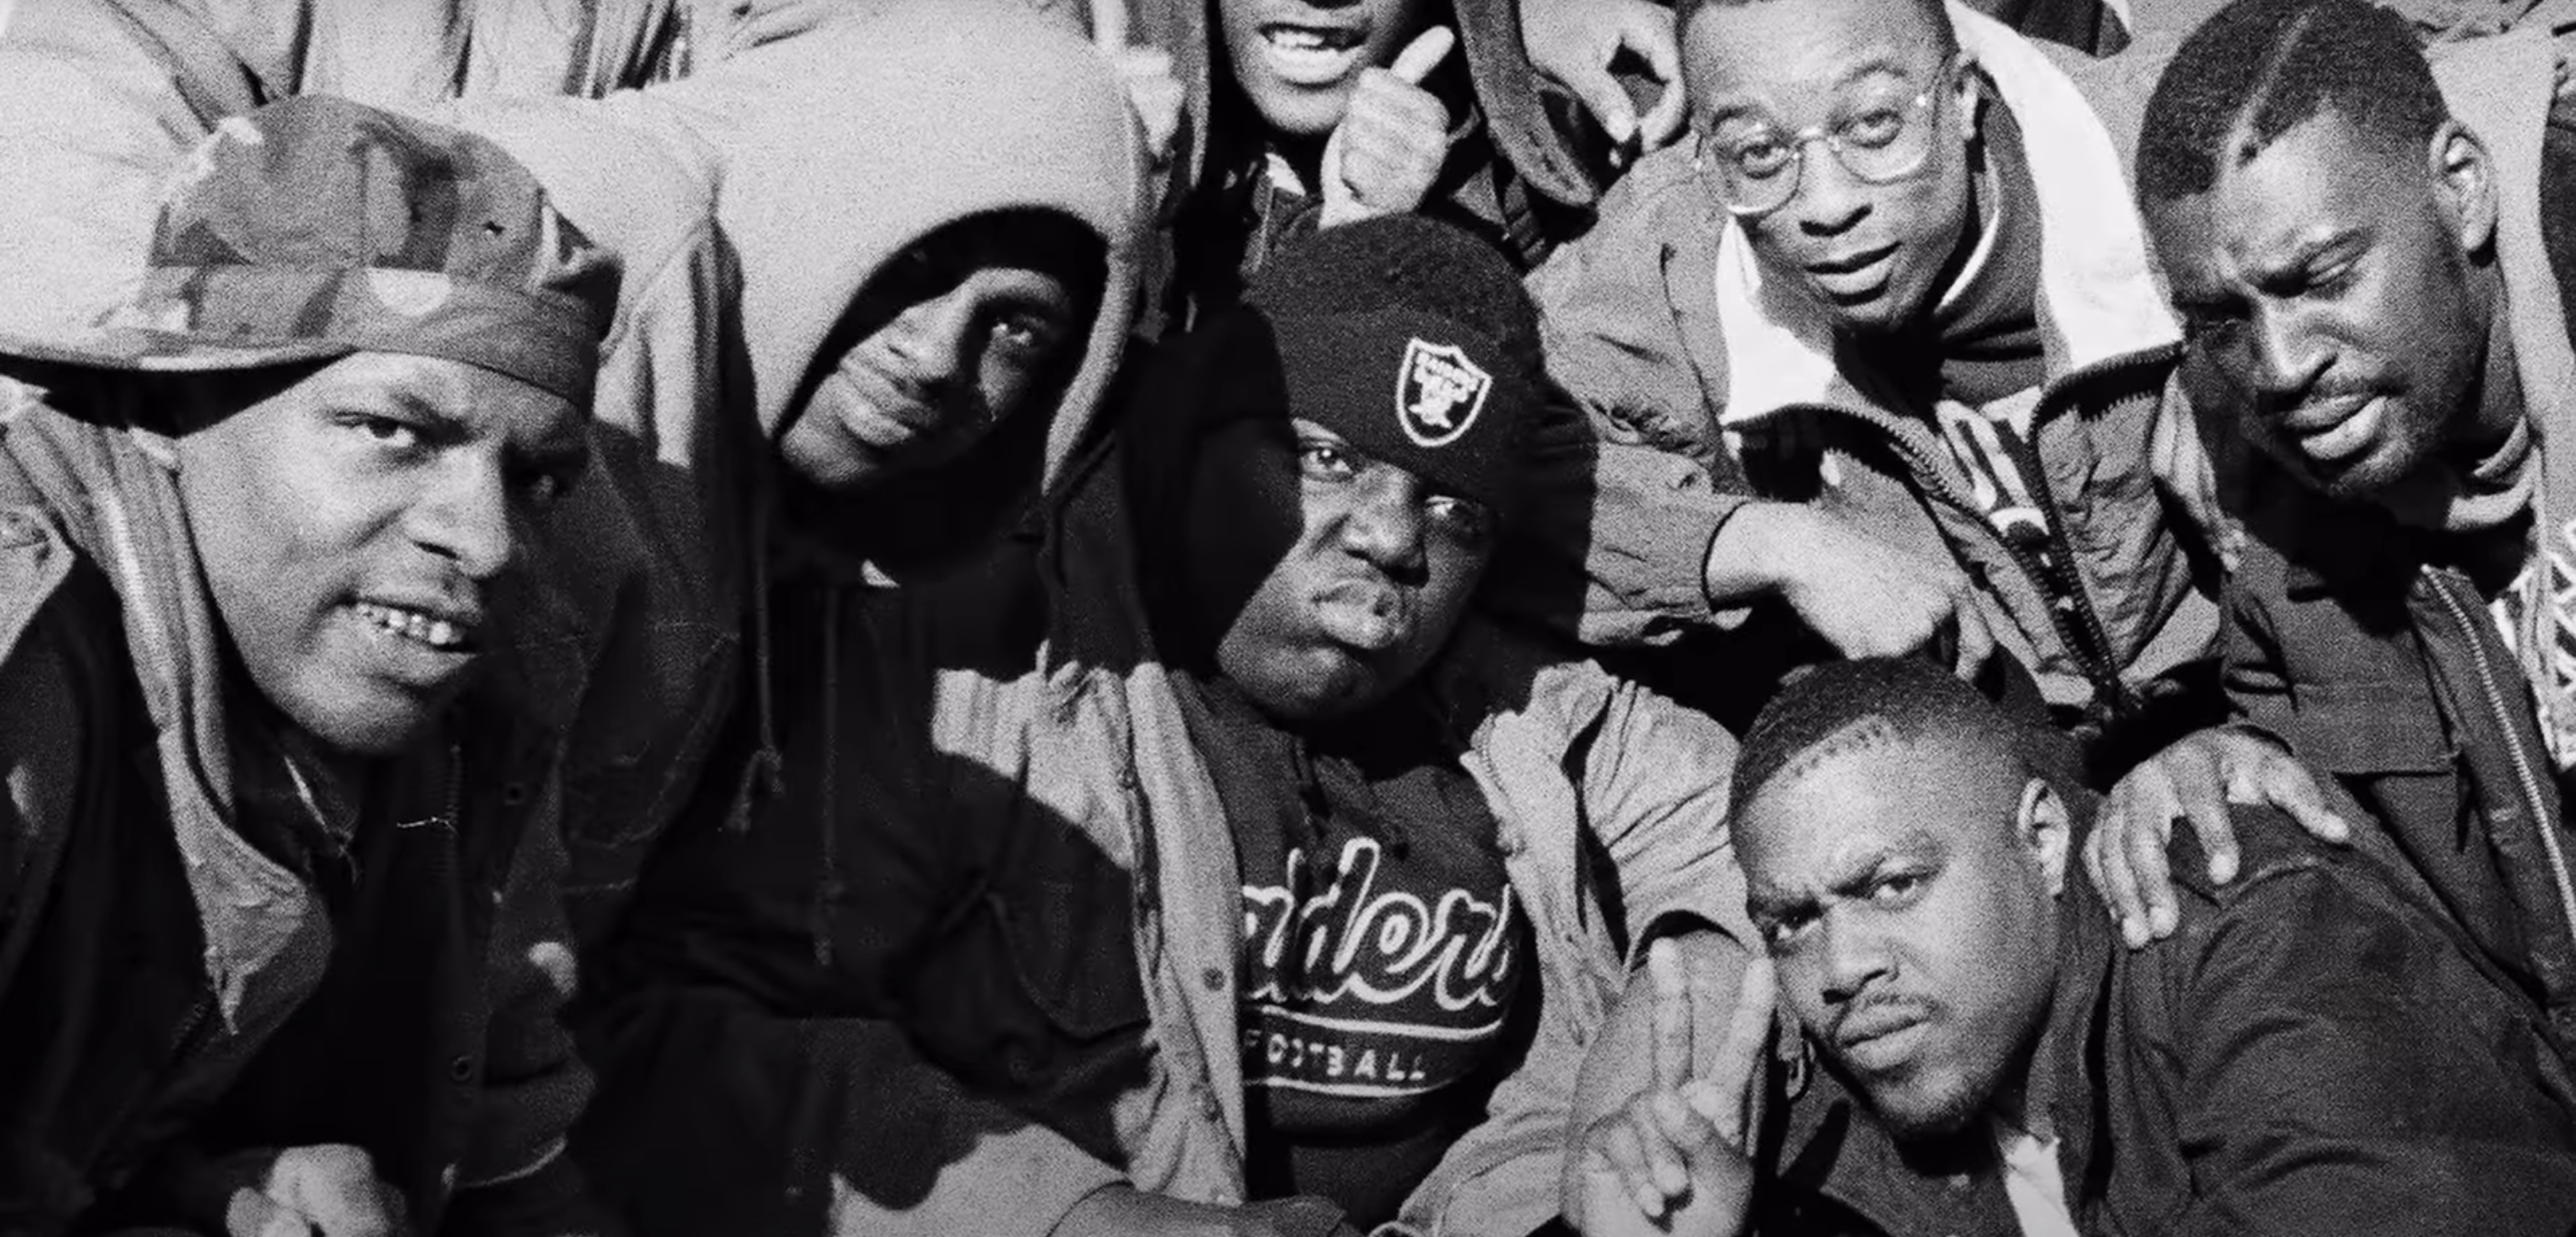 The Notorious B.I.G Estate Approved Documentary Gets First Trailer